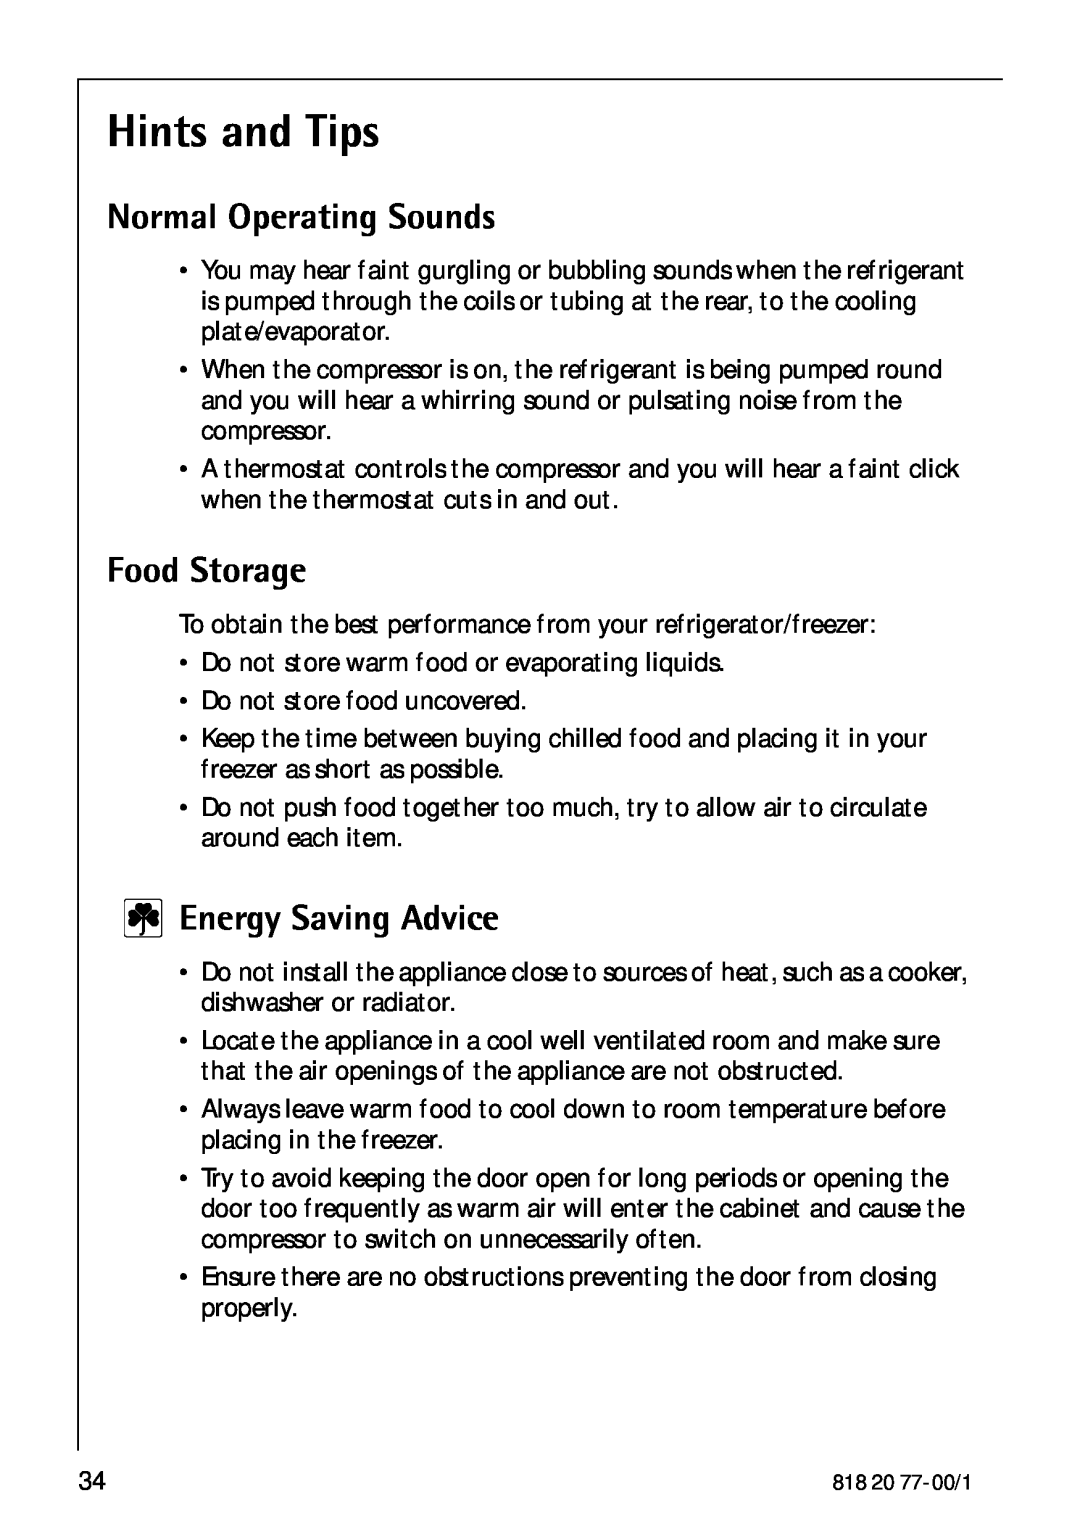 Electrolux 3985-7 KG manual Hints and Tips, Normal Operating Sounds, Food Storage, Energy Saving Advice 